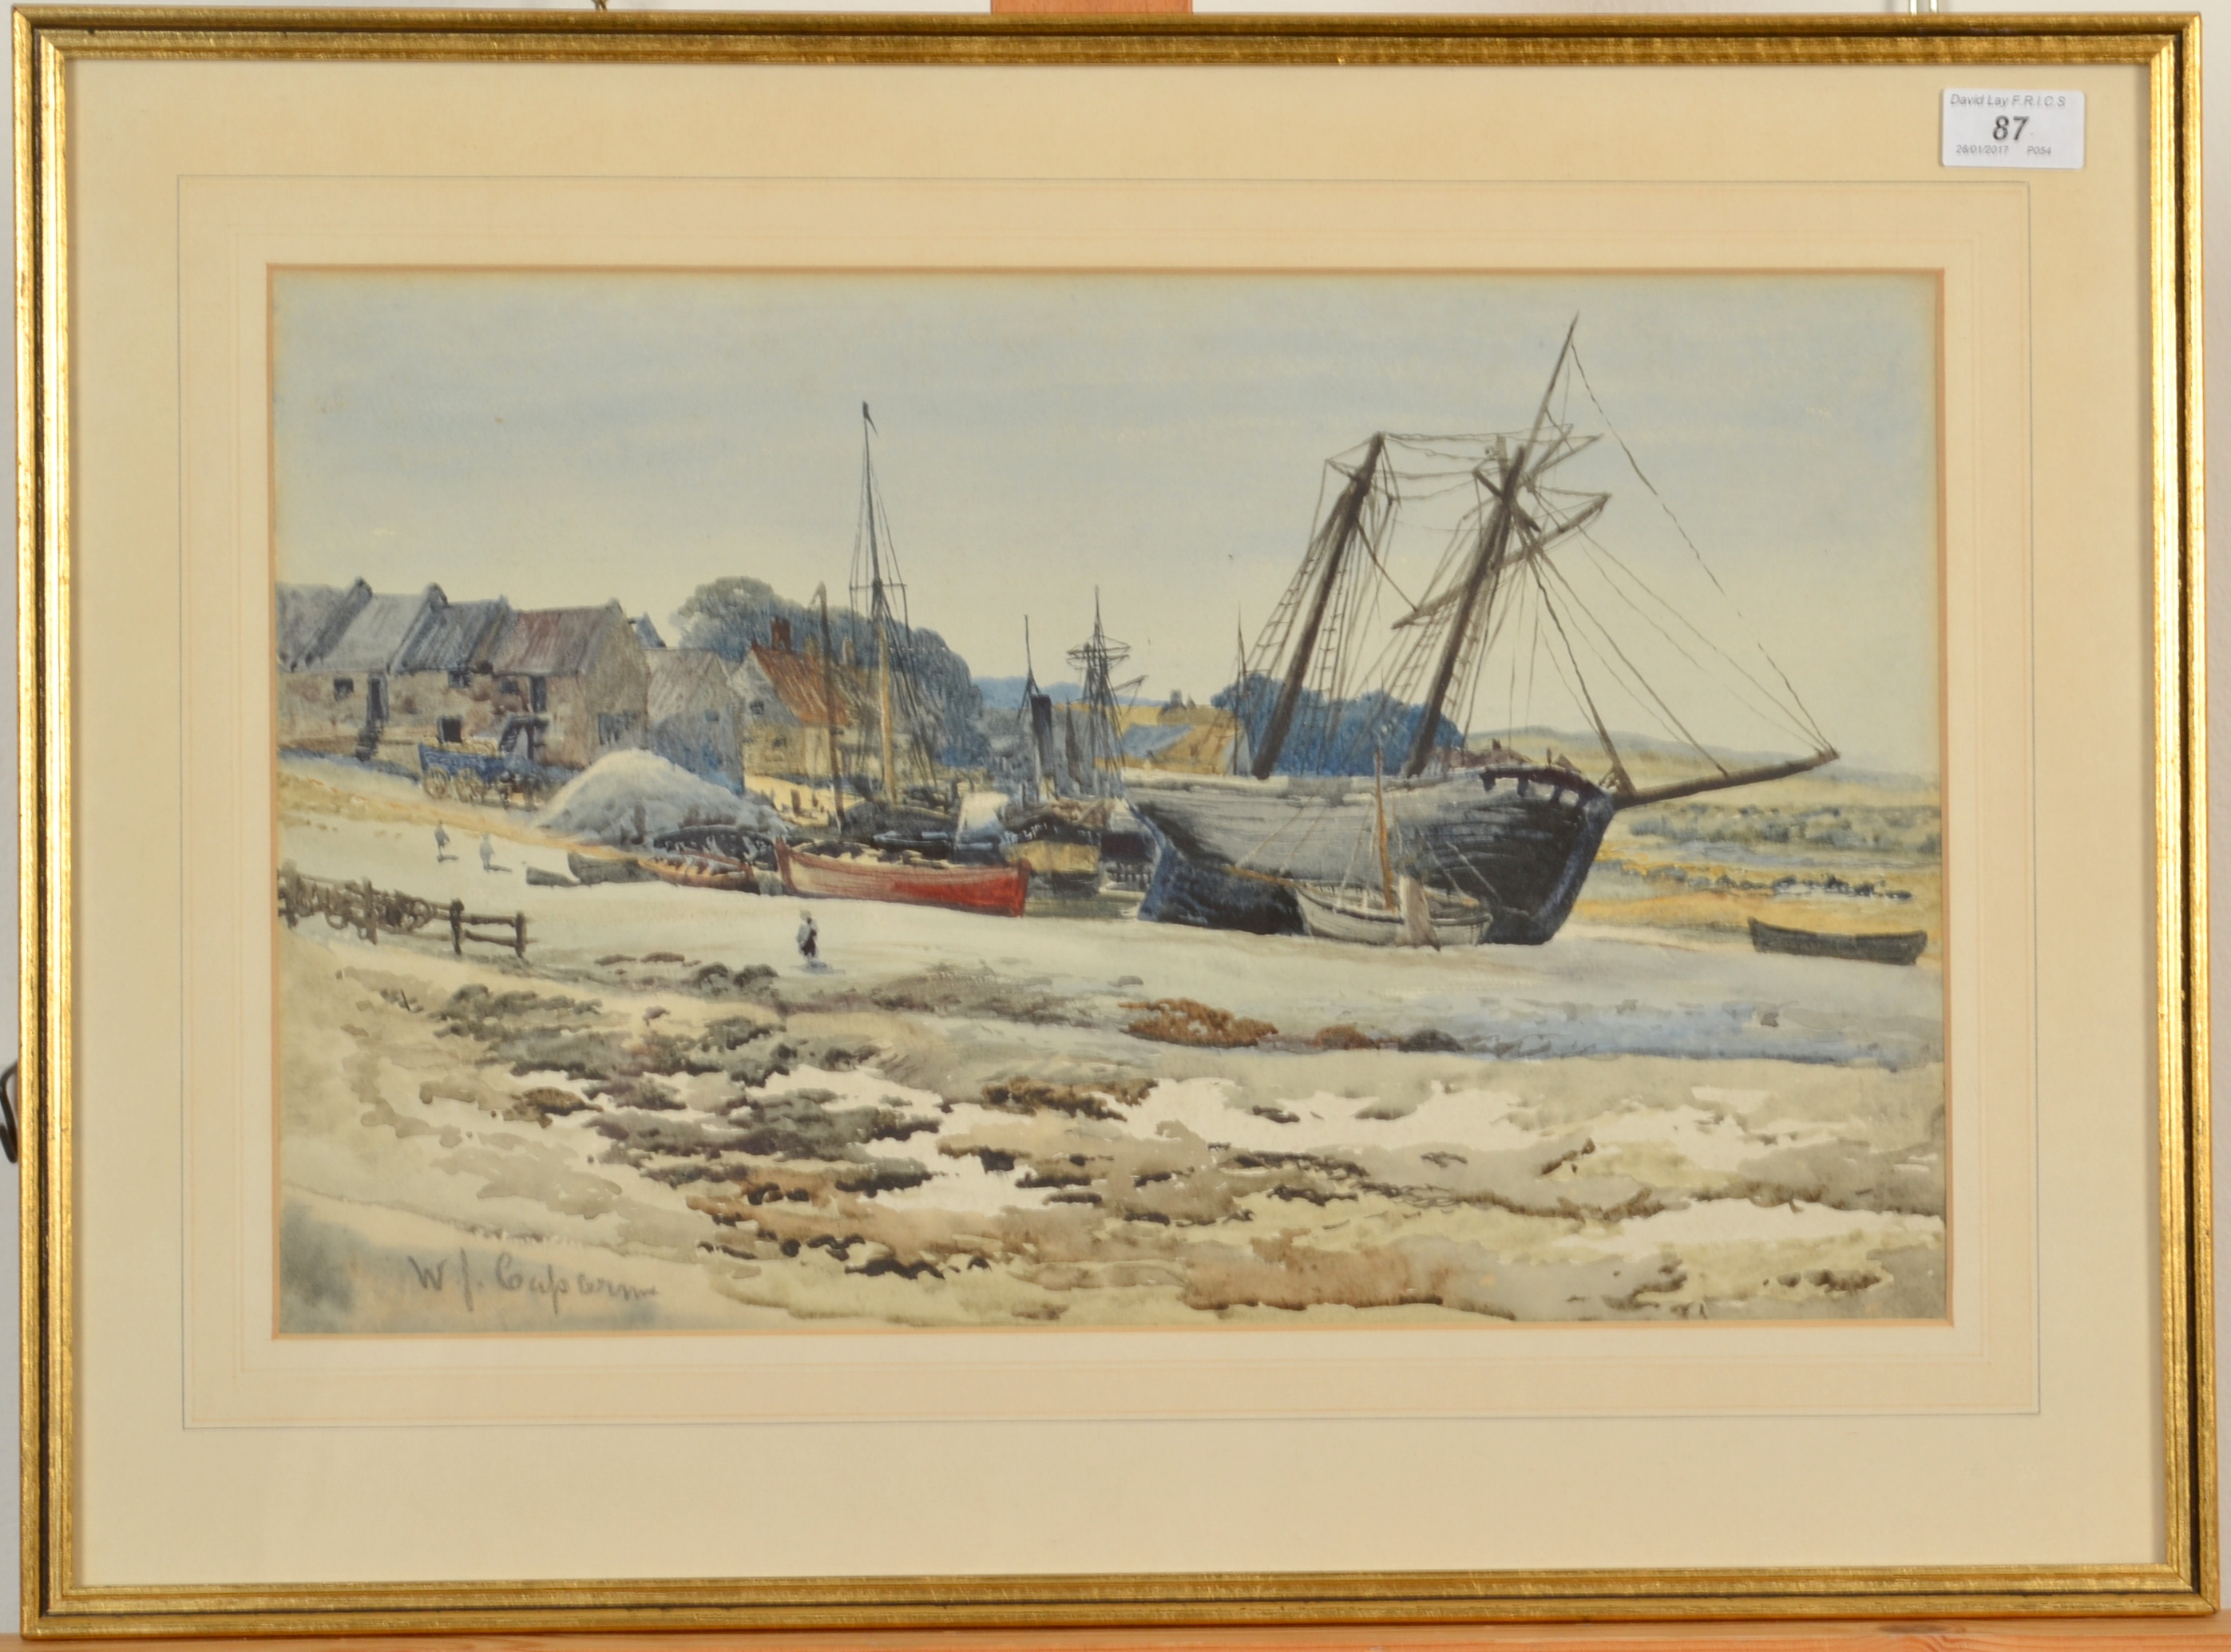 WILLIAM JOHN CAPARNE Boats Aground Watercolour Signed 28 x 44. - Image 2 of 2